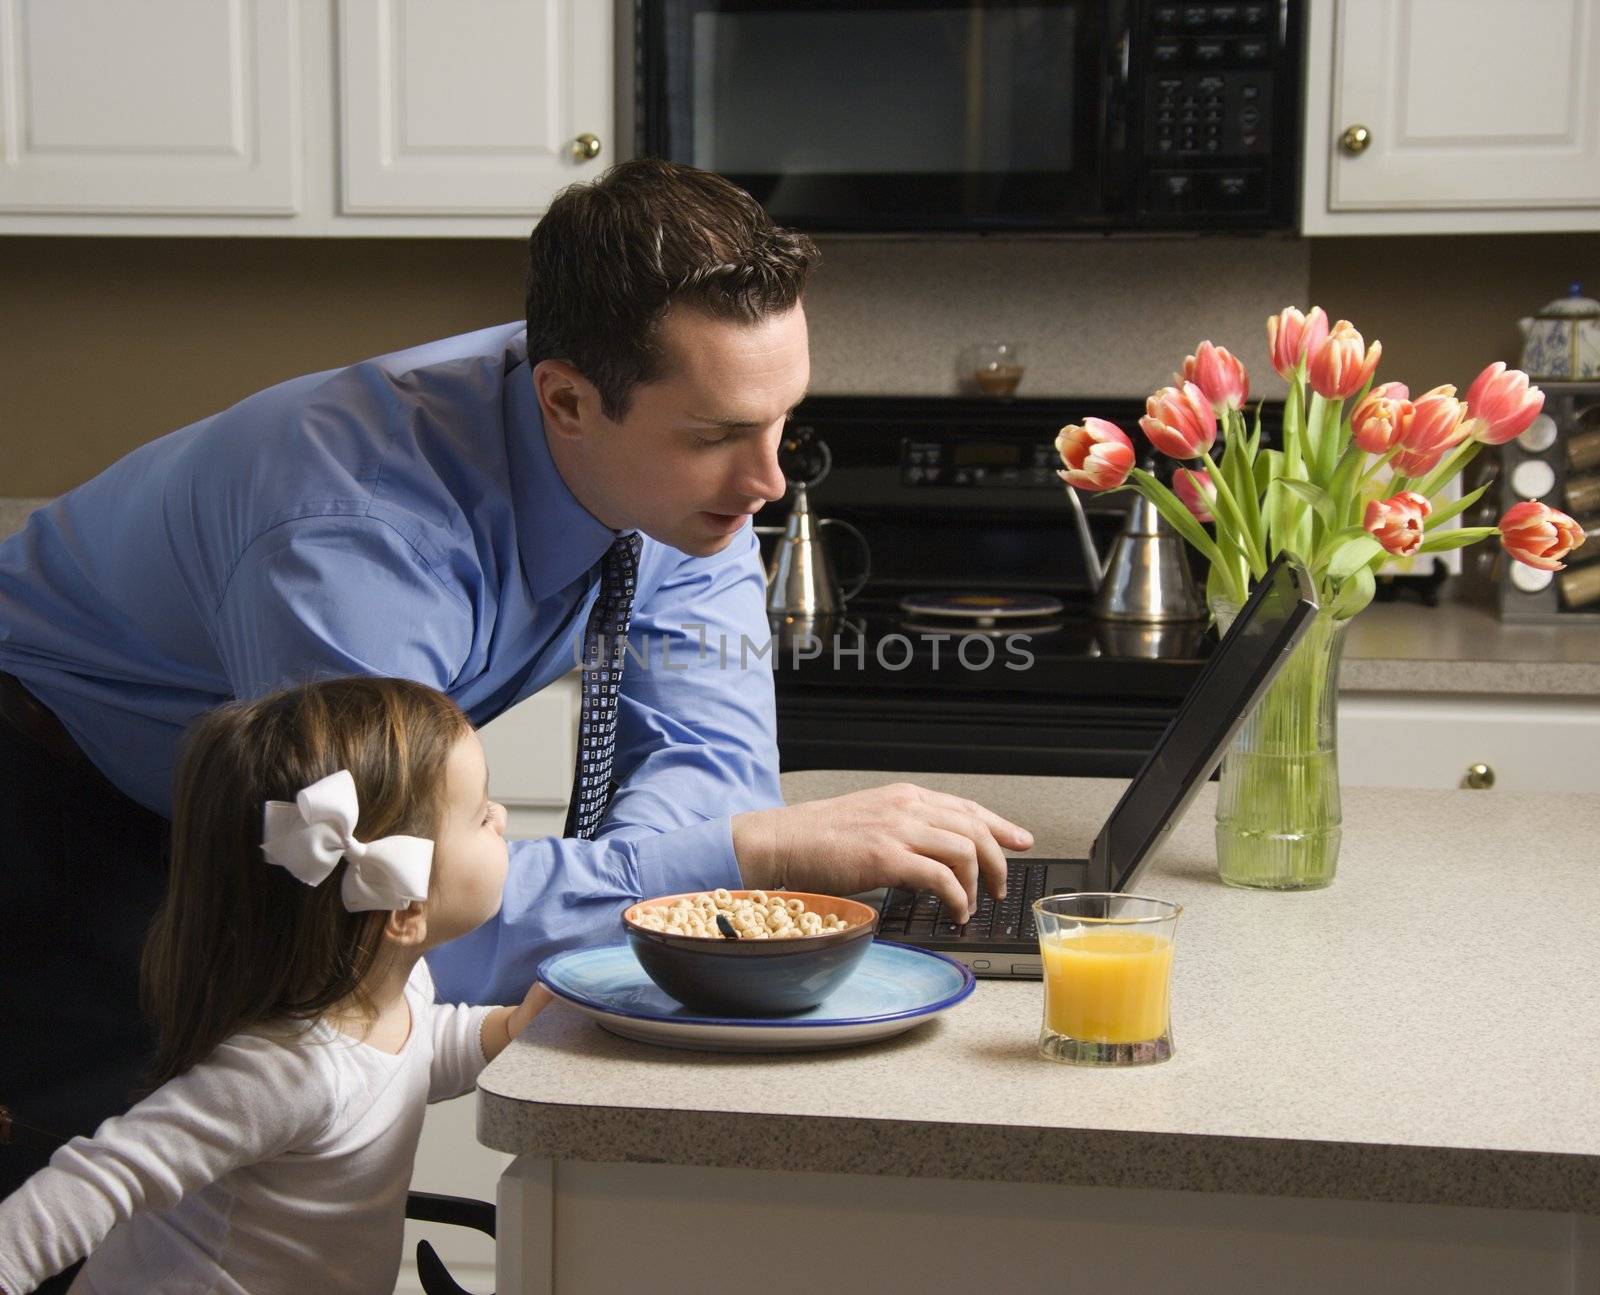 Caucasian father in suit using laptop computer with daughter eating breakfast in kitchen.